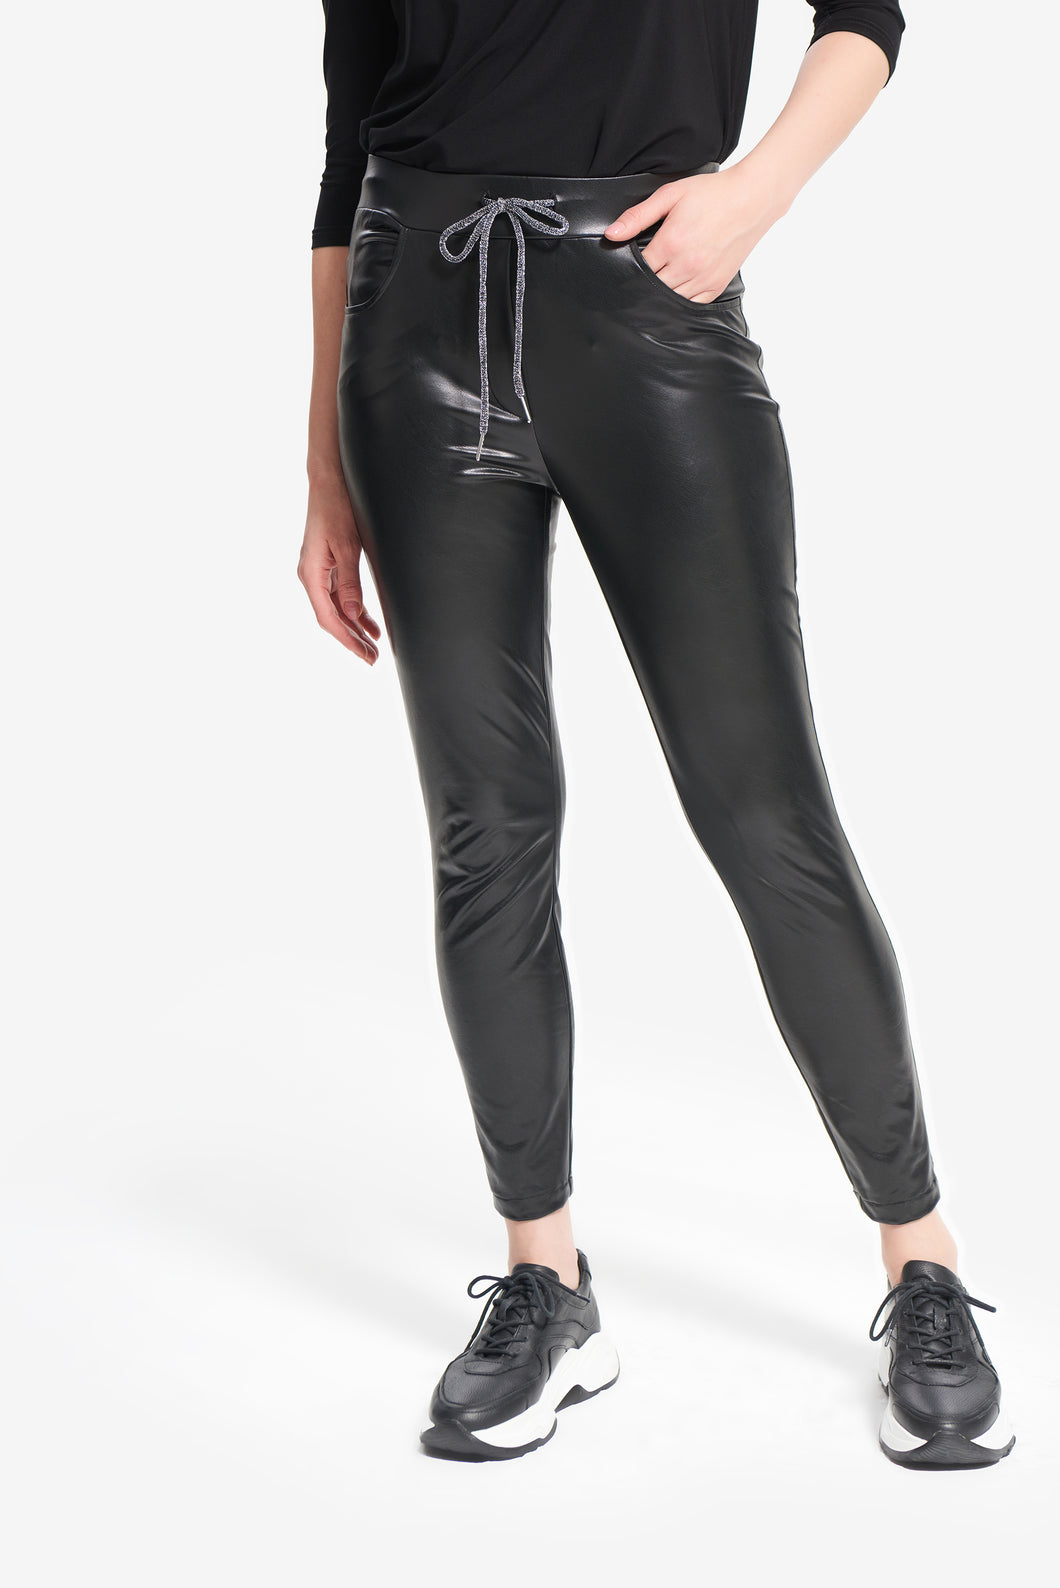 Joseph Ribkoff - Faux Leather Look Trousers